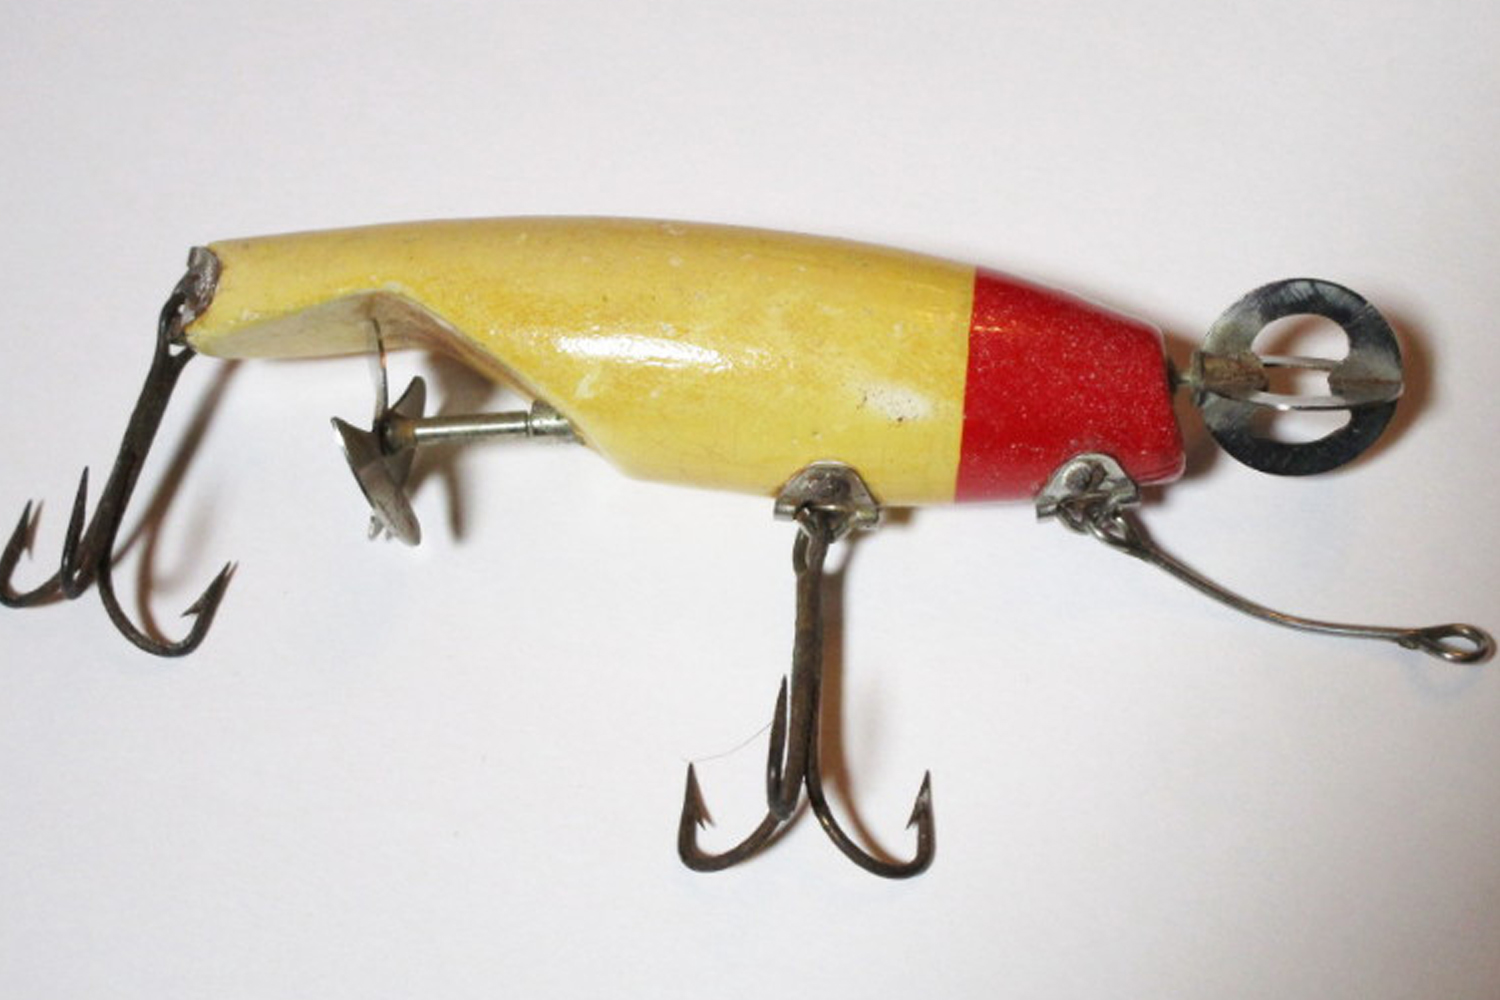 Wooden Fishing Tackle, Vintage Fishing Lure, Old lure, Vintage Tackle,, Up  the Antique Co